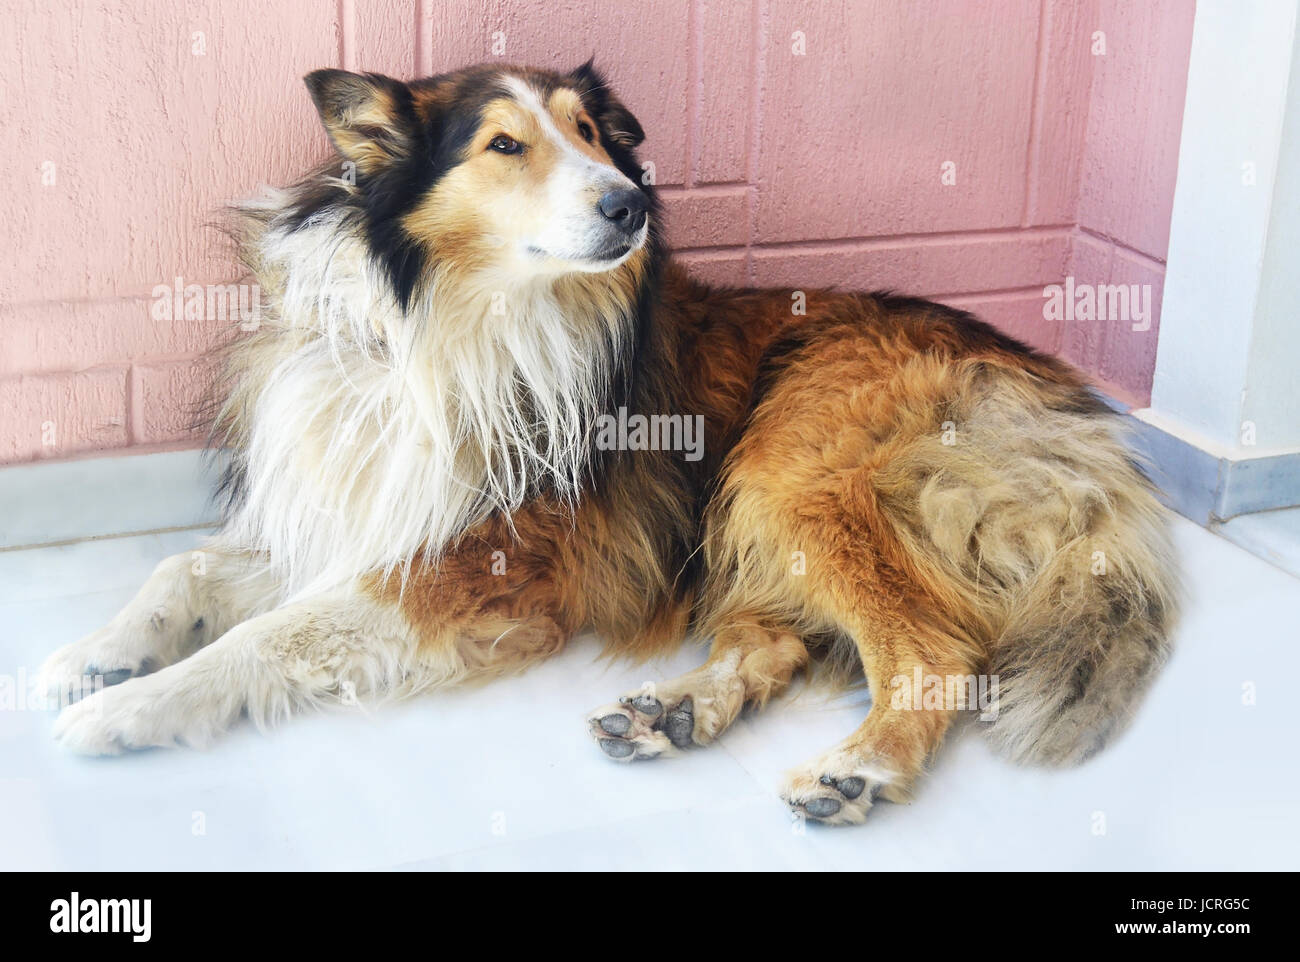 Lassie Dog Sitting Outside Of The House Stock Photo Alamy